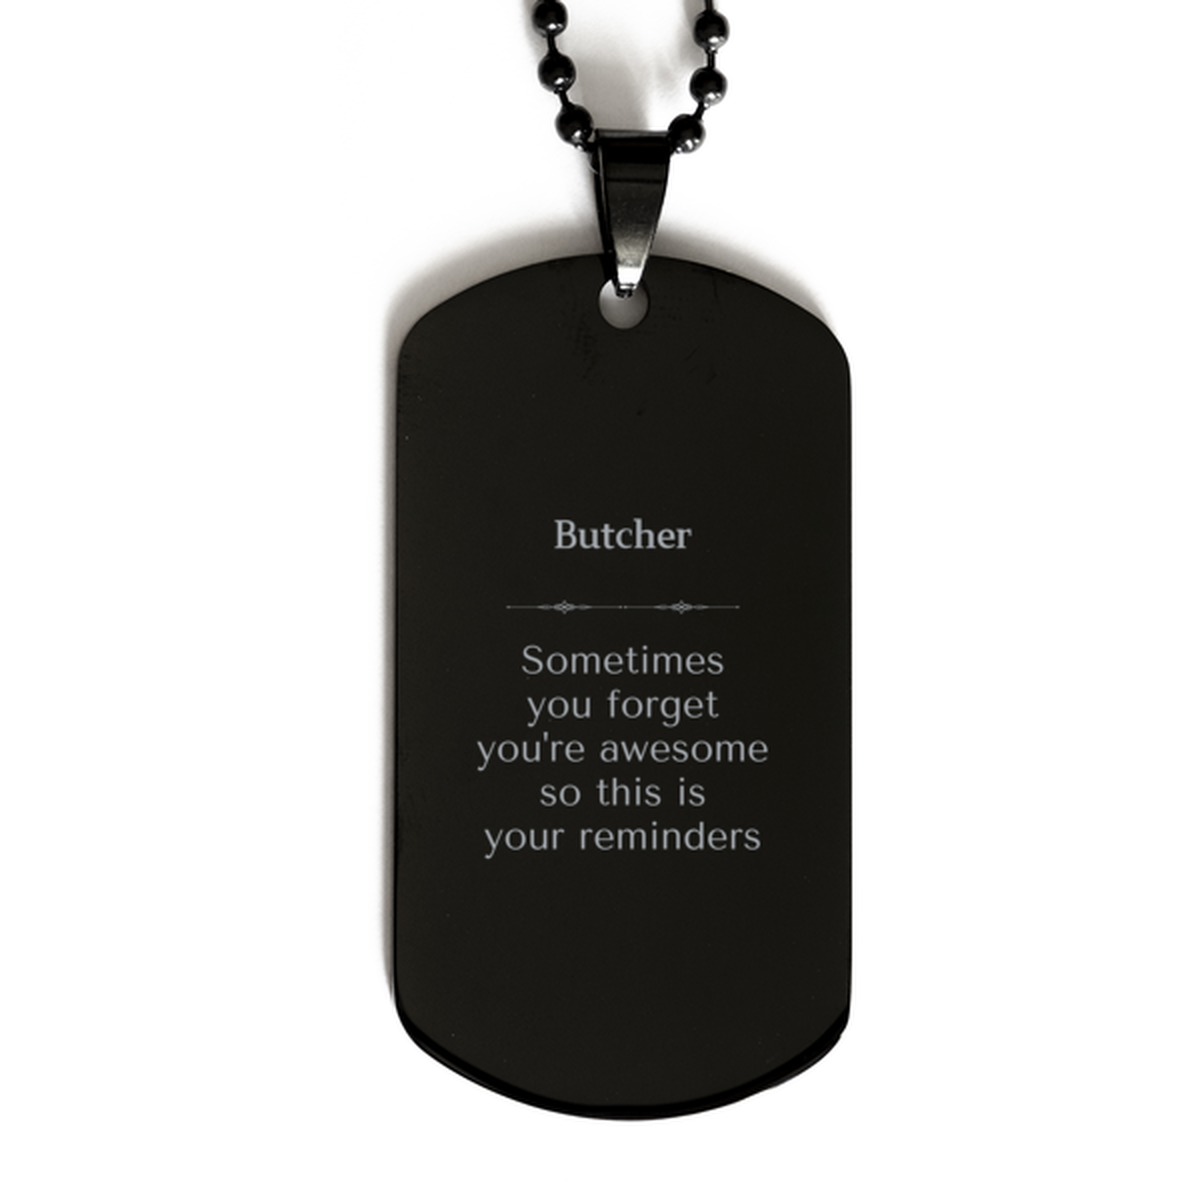 Sentimental Butcher Black Dog Tag, Butcher Sometimes you forget you're awesome so this is your reminders, Graduation Christmas Birthday Gifts for Butcher, Men, Women, Coworkers